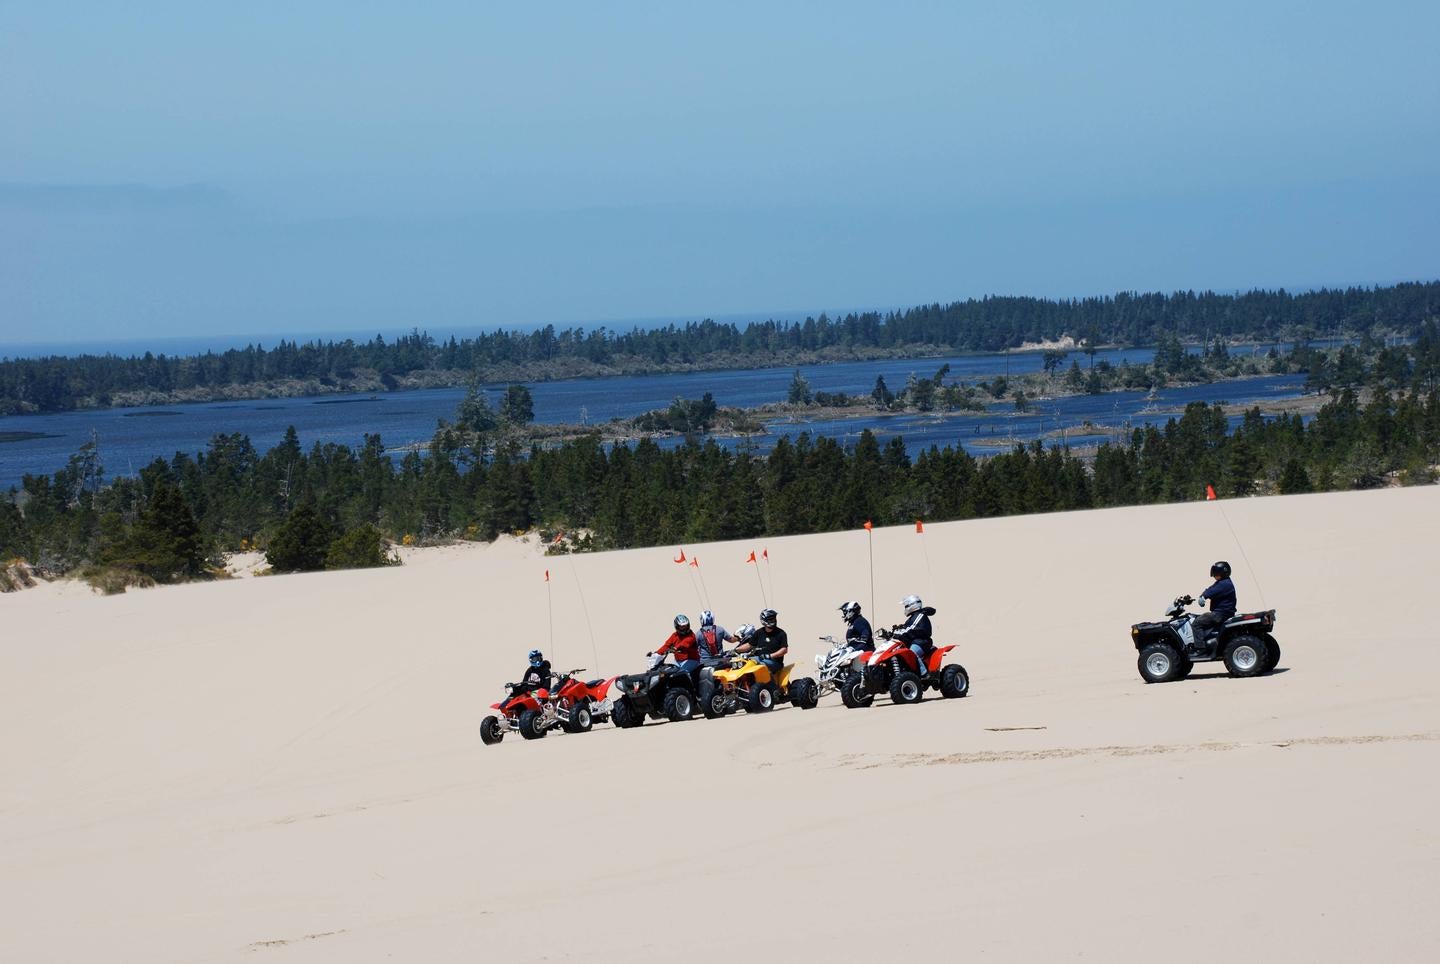 Off road vehicles on flat expanse of sand in front of blue lake ringed by conifer trees.



The dunes near Horsfall Campground

Credit: USFS